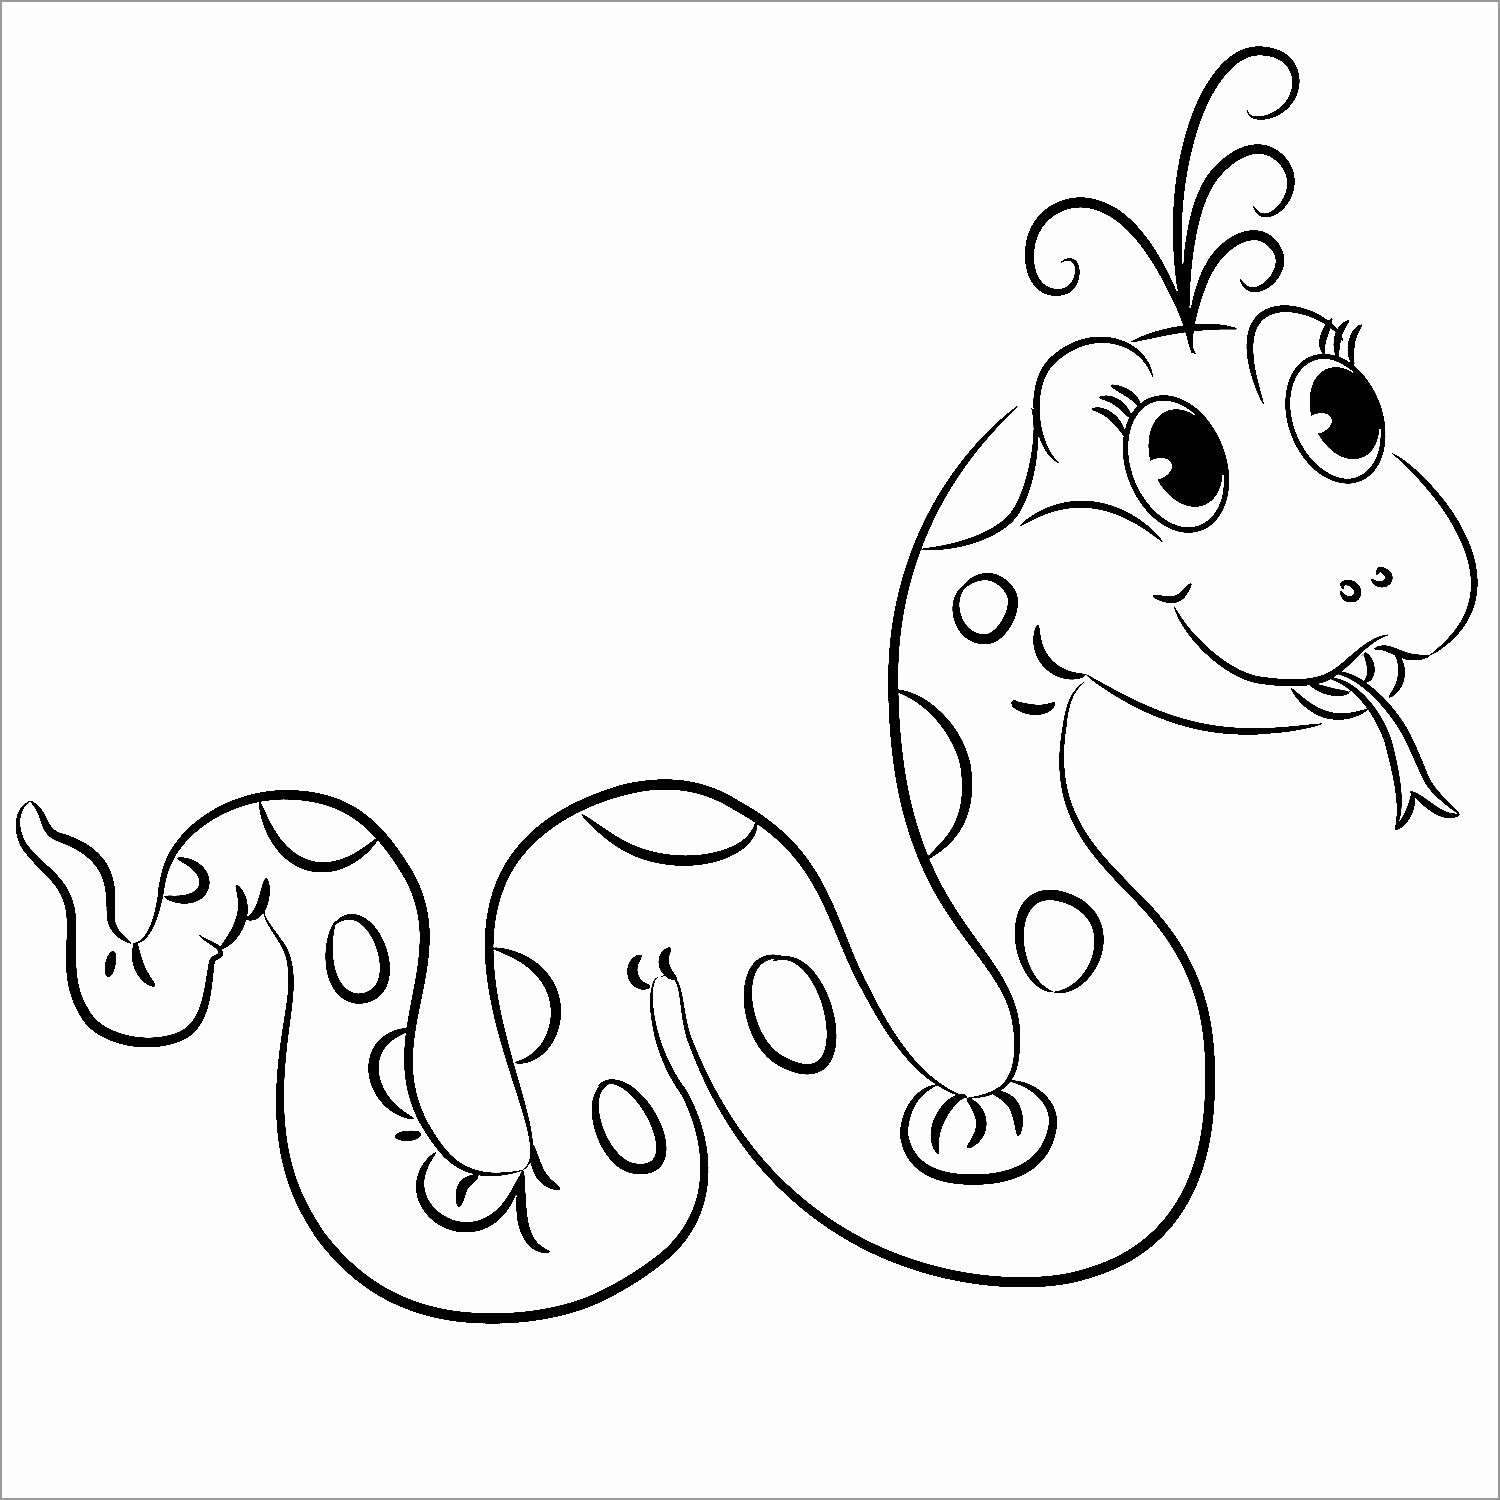 Cute Snake Coloring Page